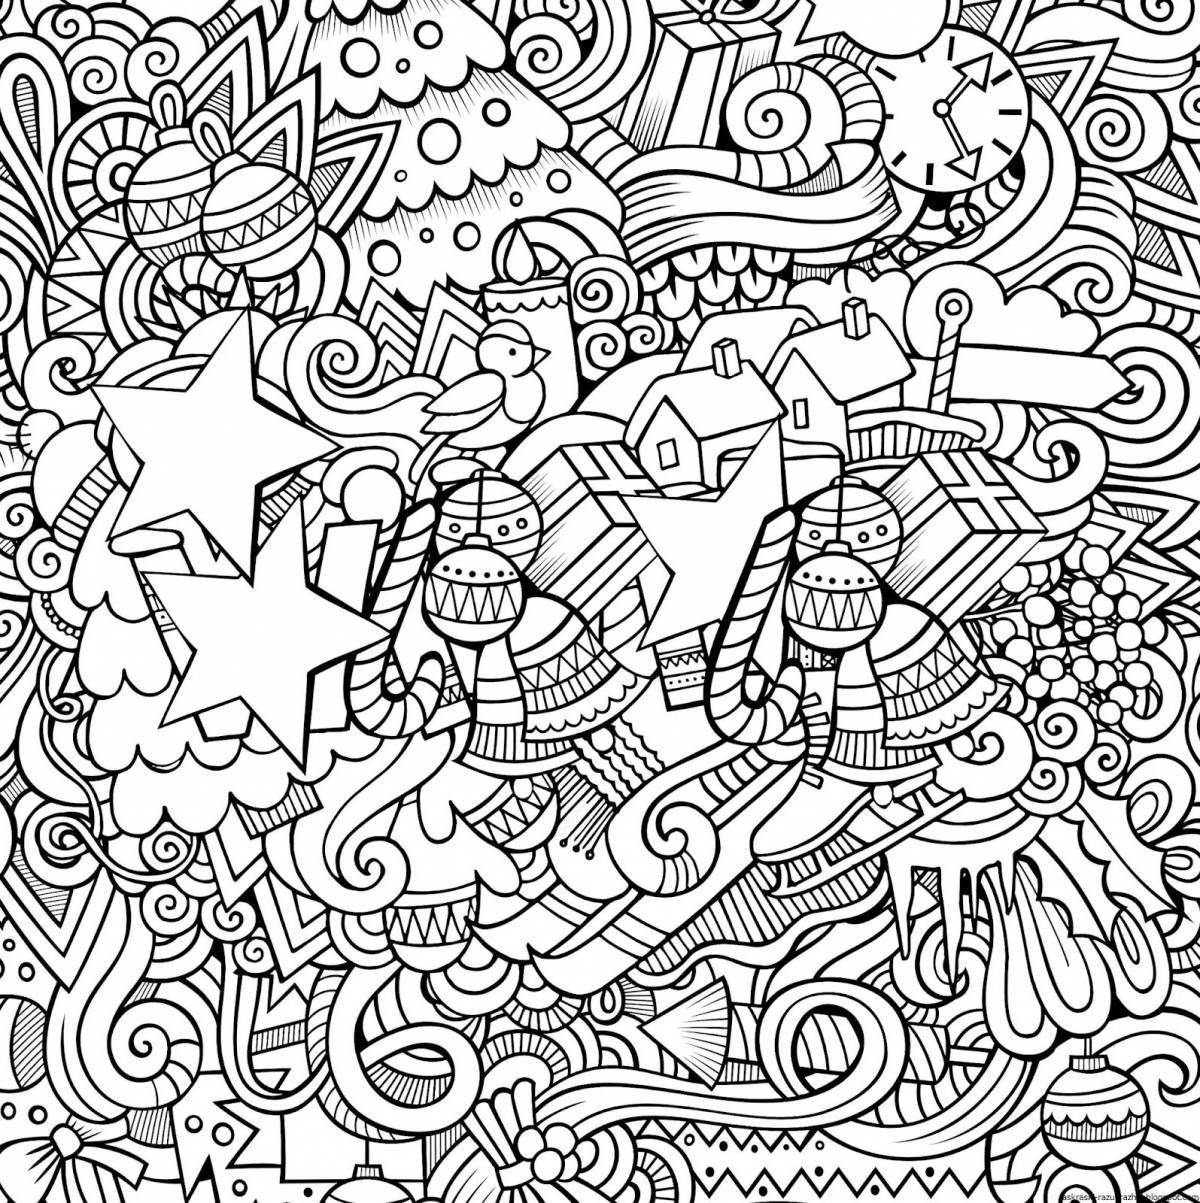 Magical 15 Years Antistress Coloring Book